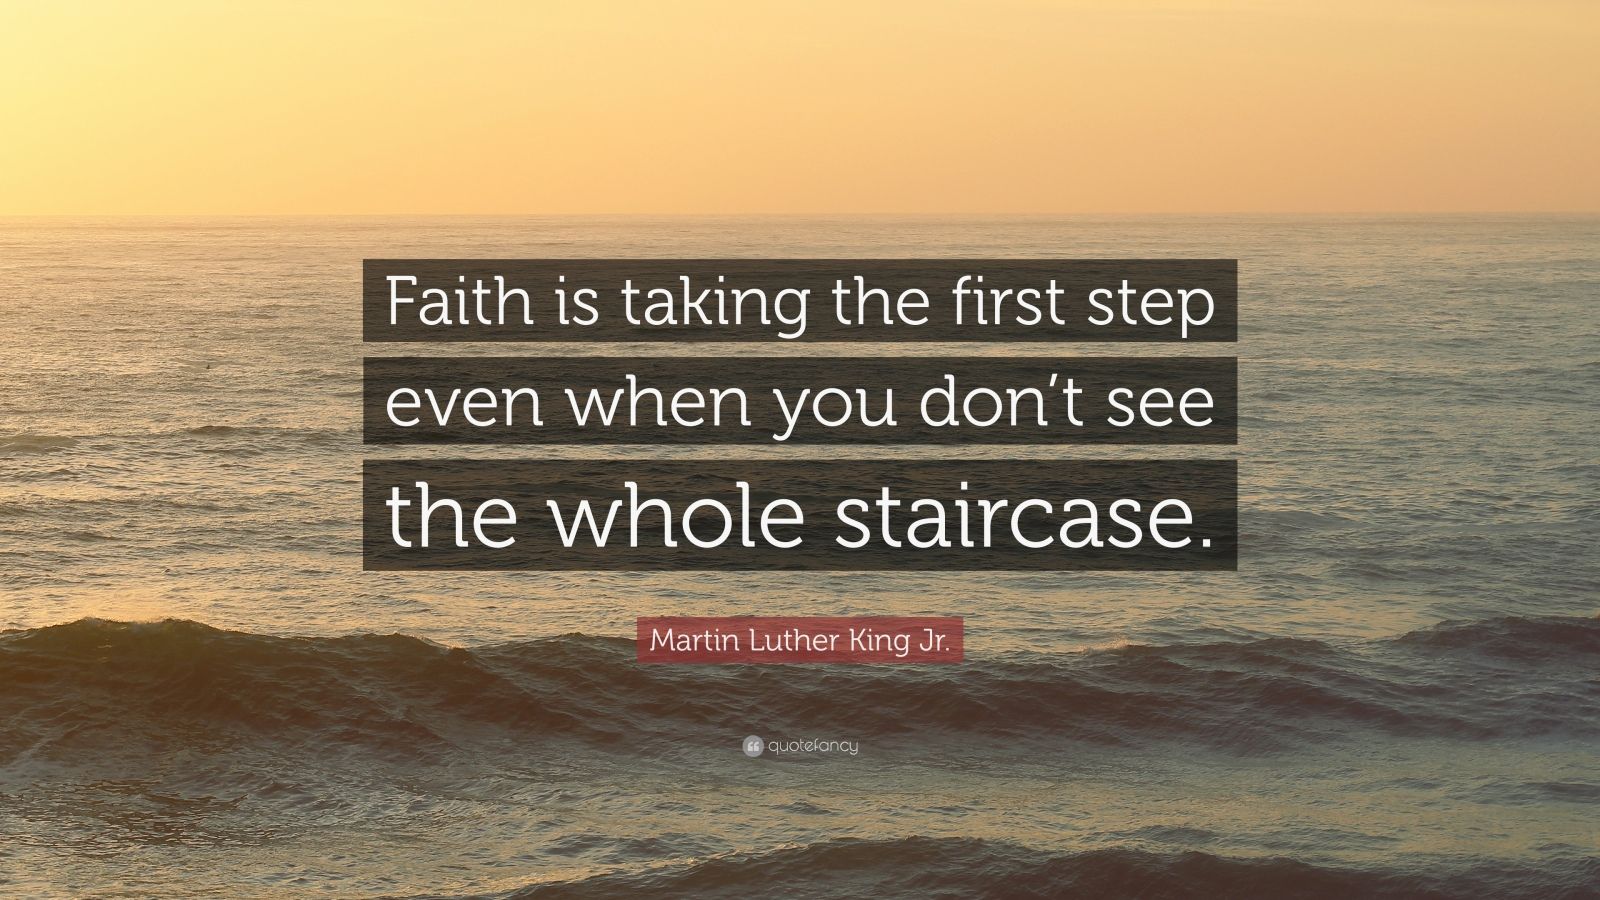 Martin Luther King Jr. Quote: “Faith is taking the first step even when